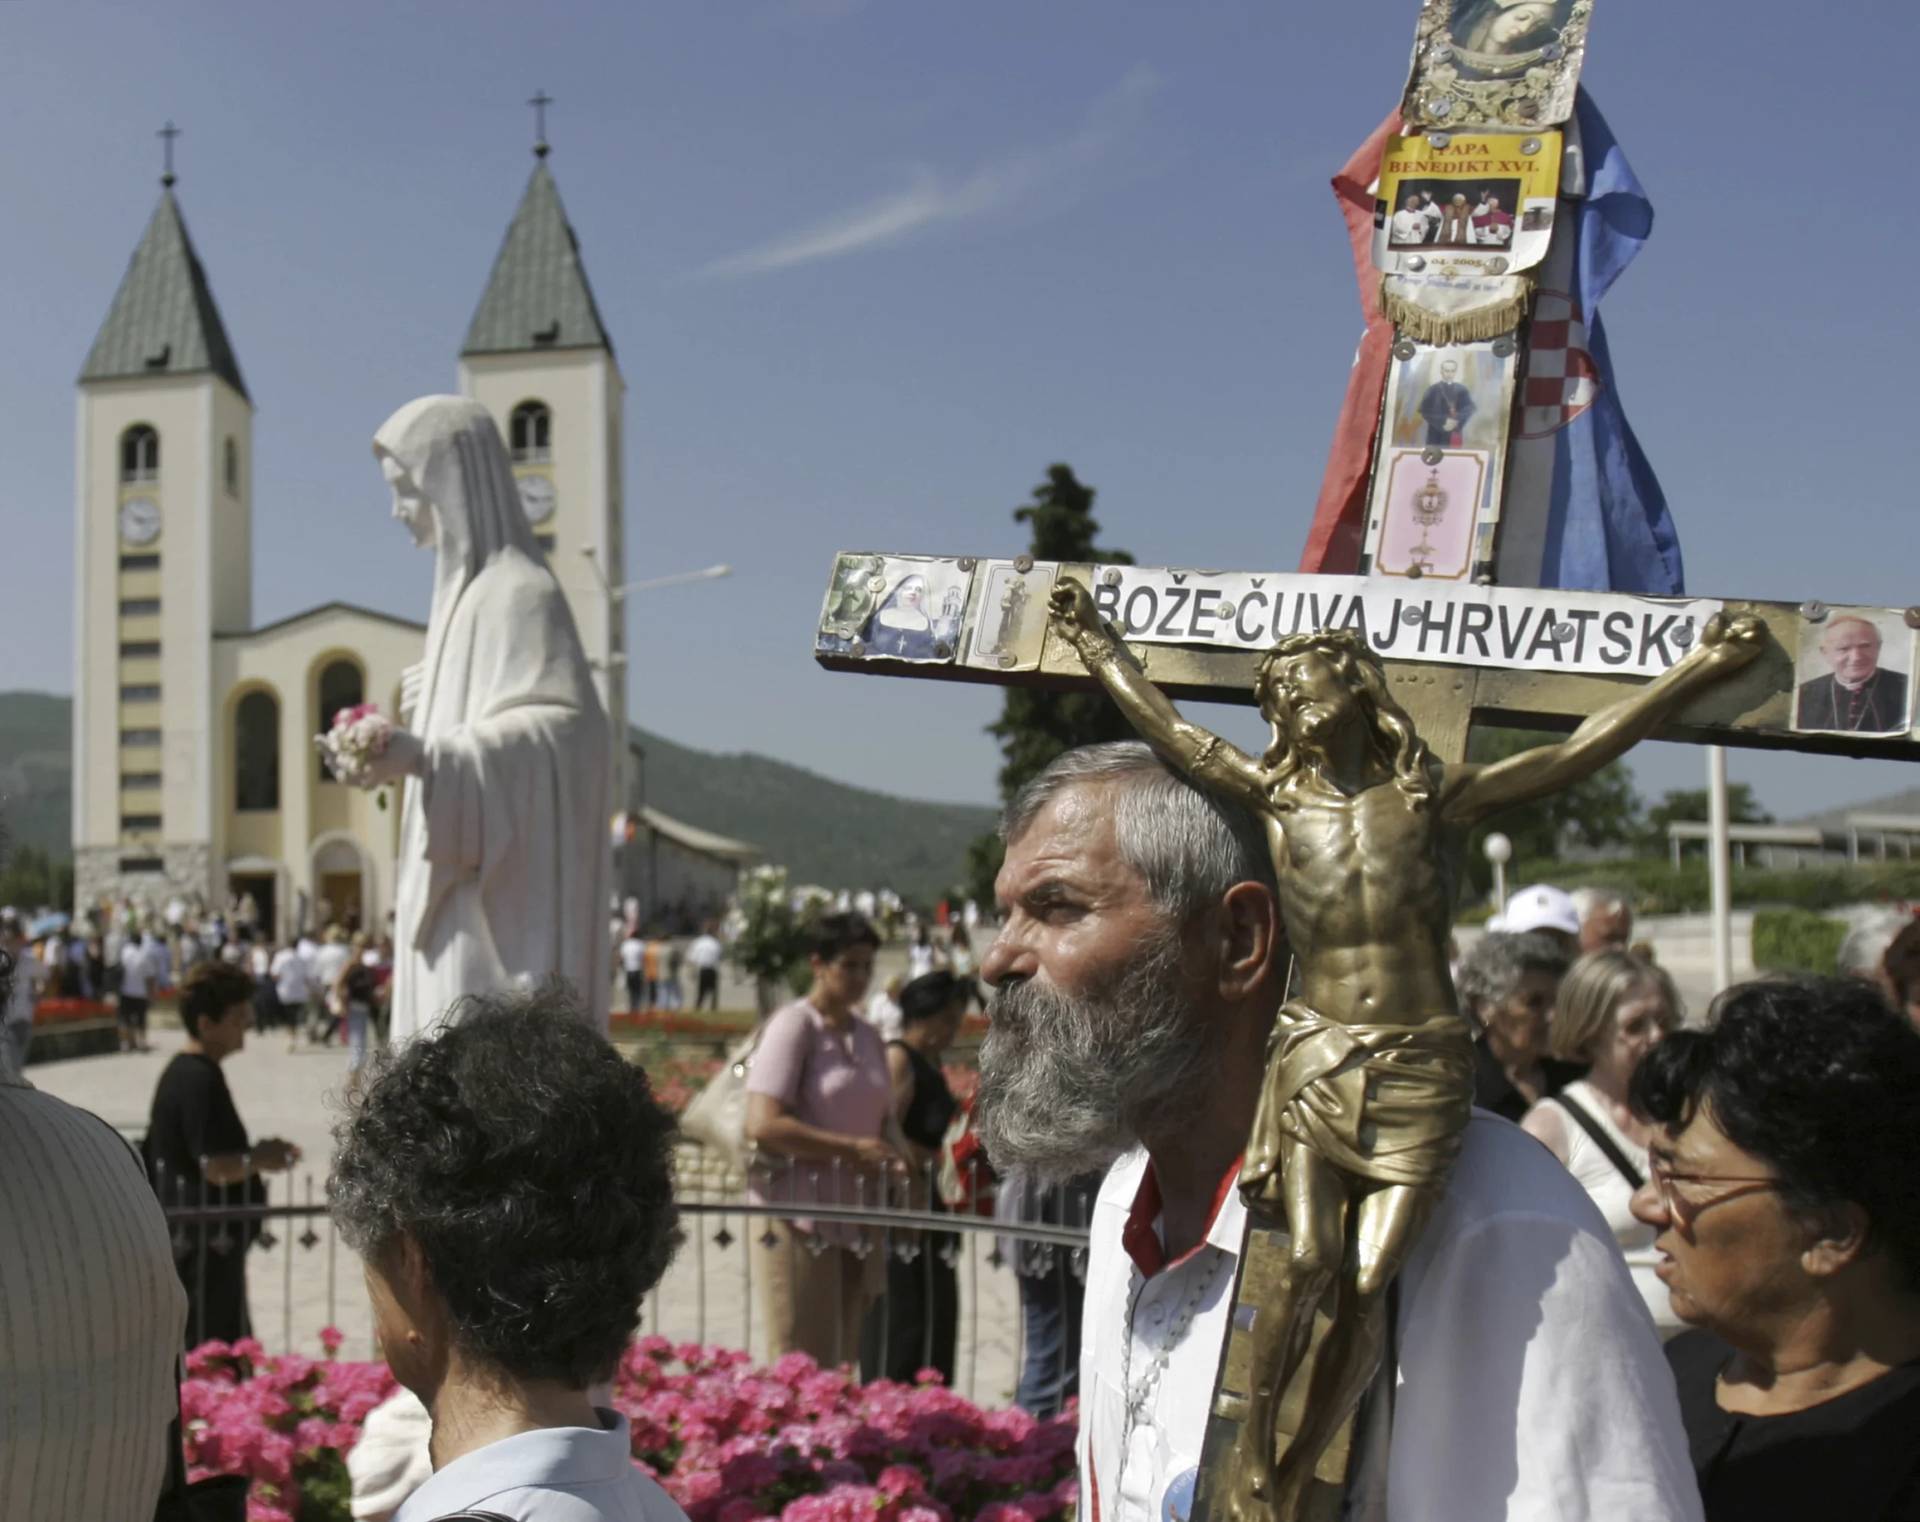 Pilgrims walk around a statue of the Blessed Virgin Mary near the church of St. James in Medjugorje, Bosnia and Herzegovina, about 75 miles south of the Bosnian capital of Sarajevo on Sunday, June 25, 2006. On Friday, May 17, 2024, the Vatican issued revised norms for discerning apparitions “and other supernatural phenomena,” updating a set of guidelines first issued in 1978. (Credit: Amel Emric/AP.)